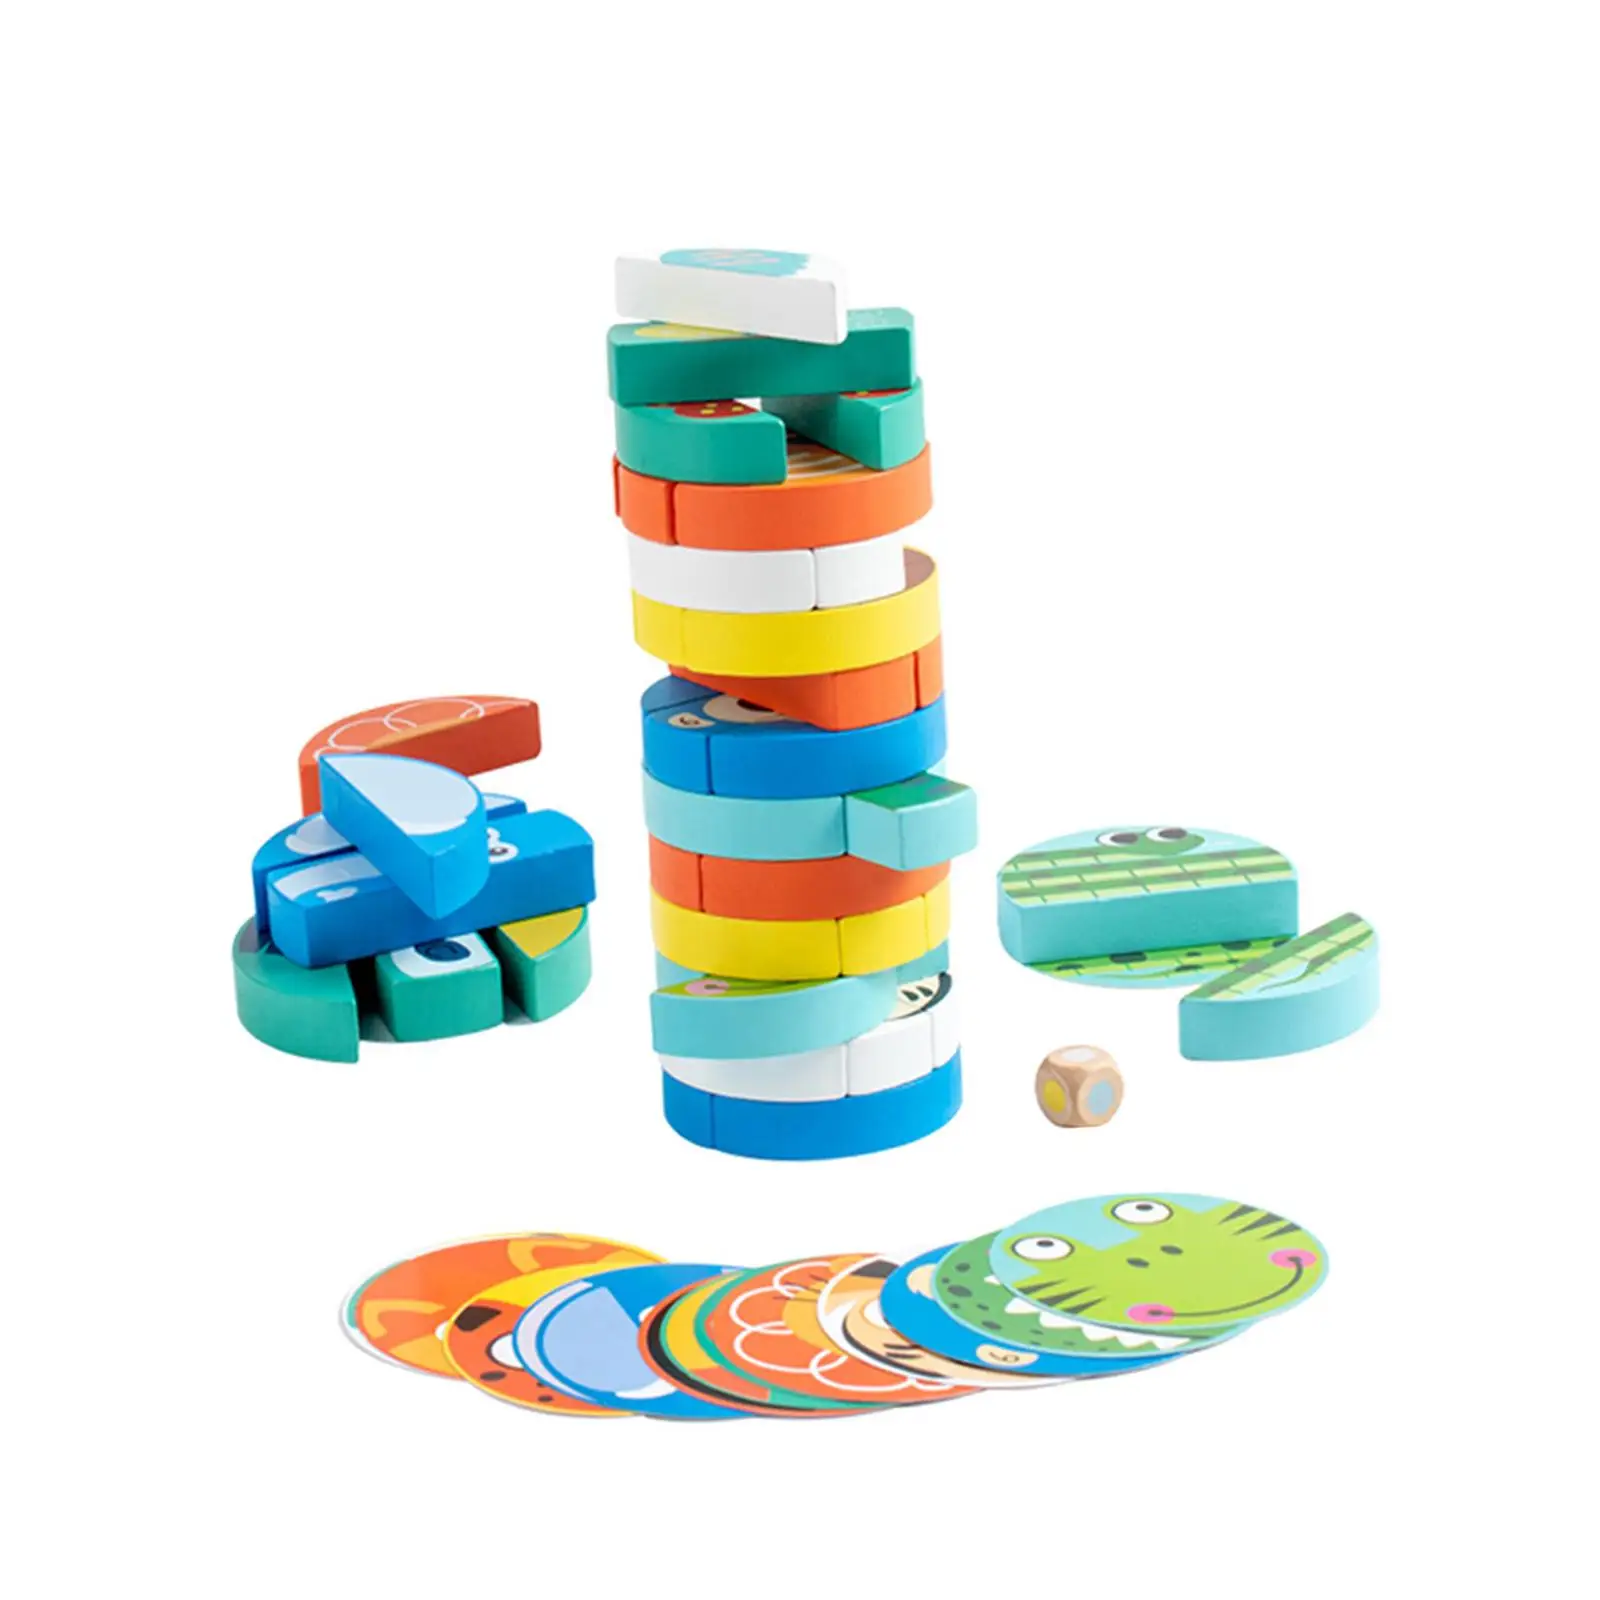 Wooden Blocks Stacking Game Tumble Towers Game Fine Motor Skills Cute Towers